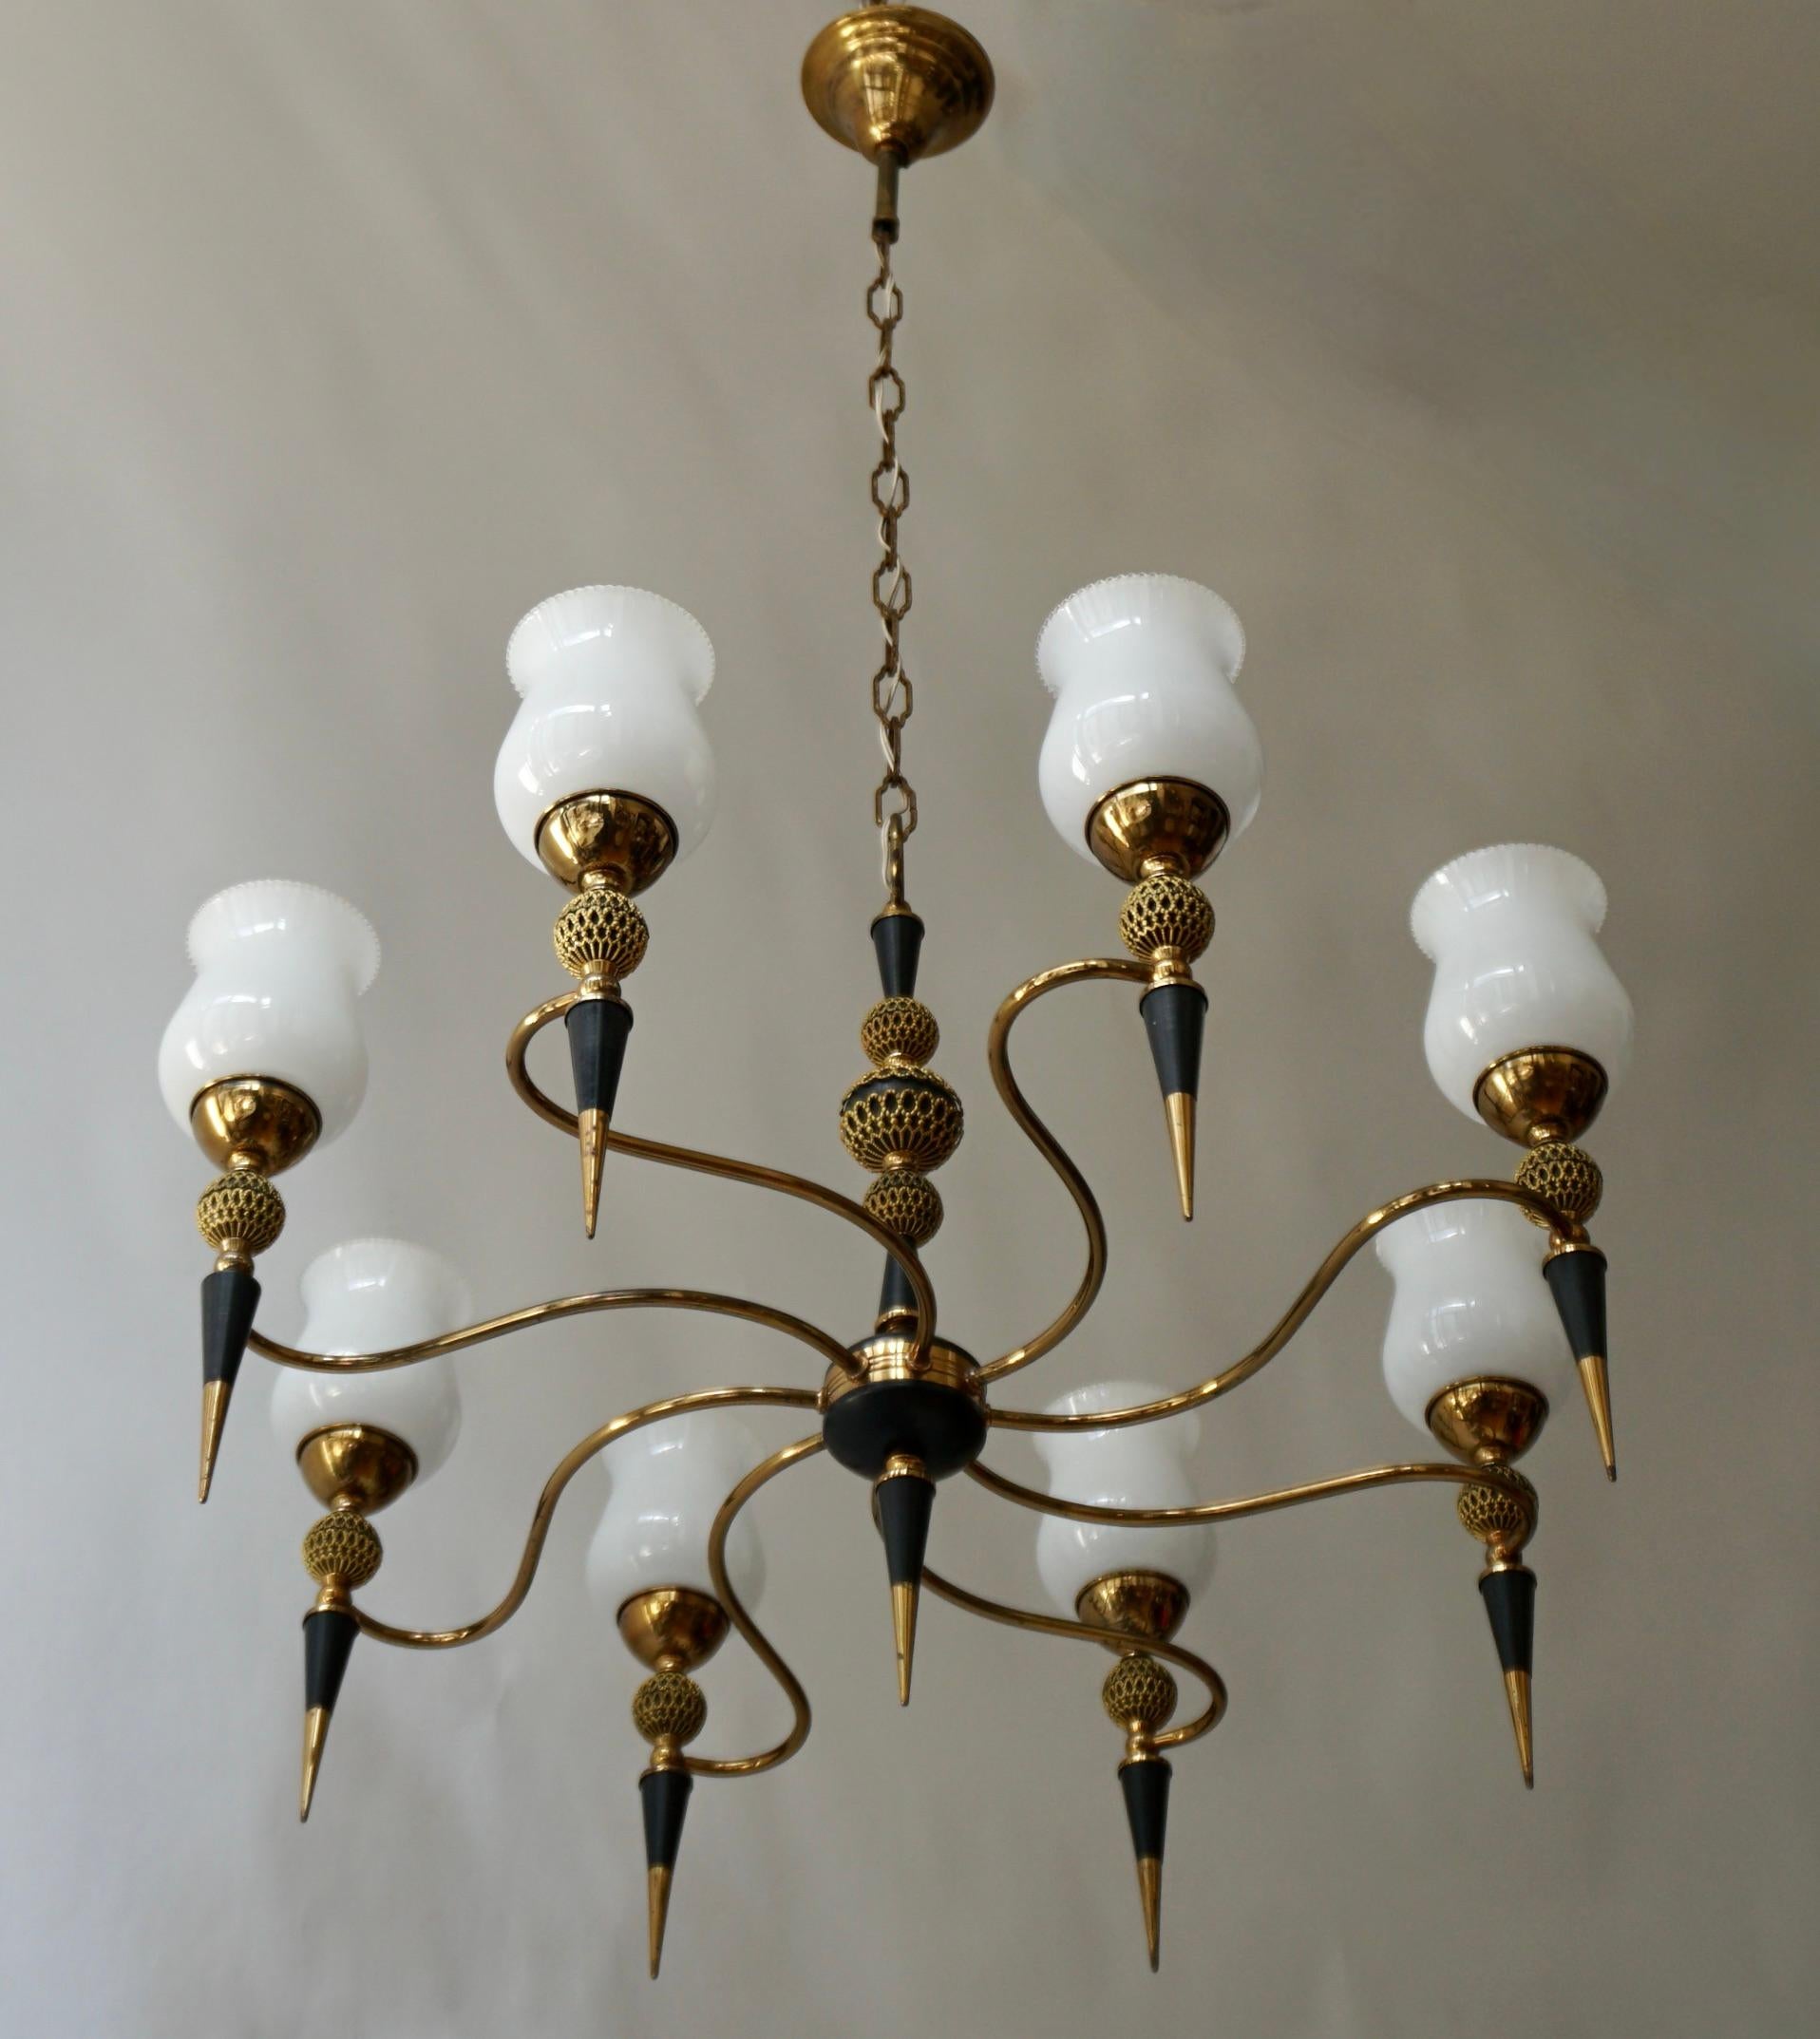 Imposing structure for this beautiful italian design chandelier from 1950s .The chandelier is made up of 8 opal glass bowls and has brass structure.

Diameter 27.1